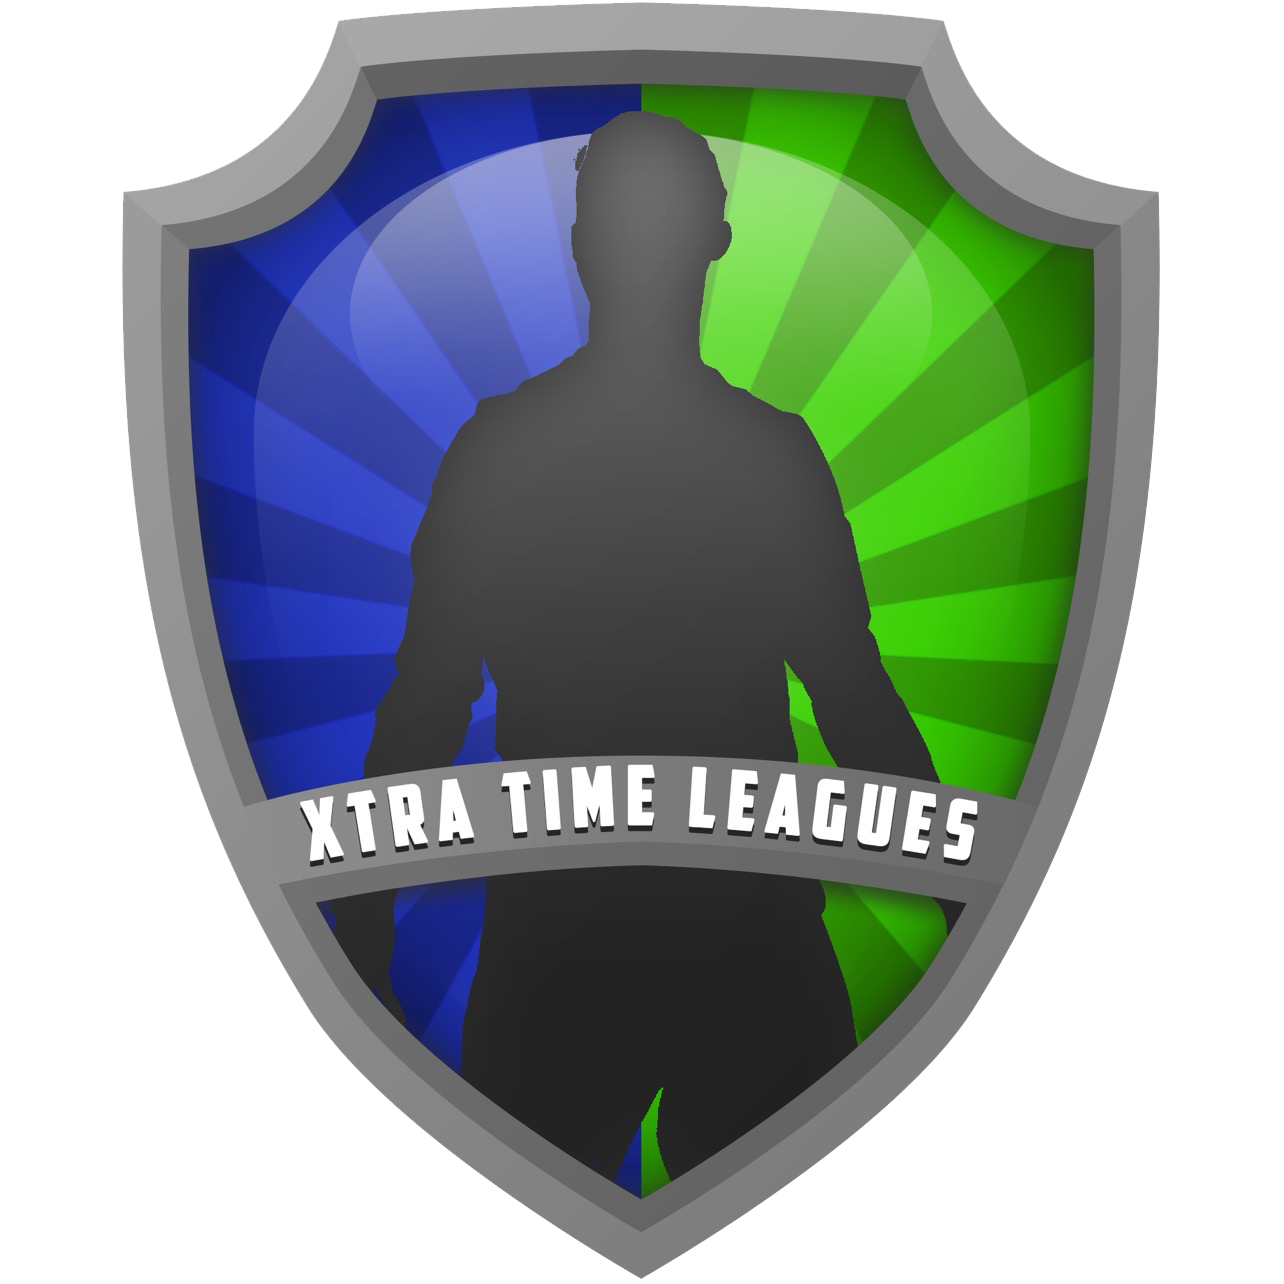 Xtra Time Leagues